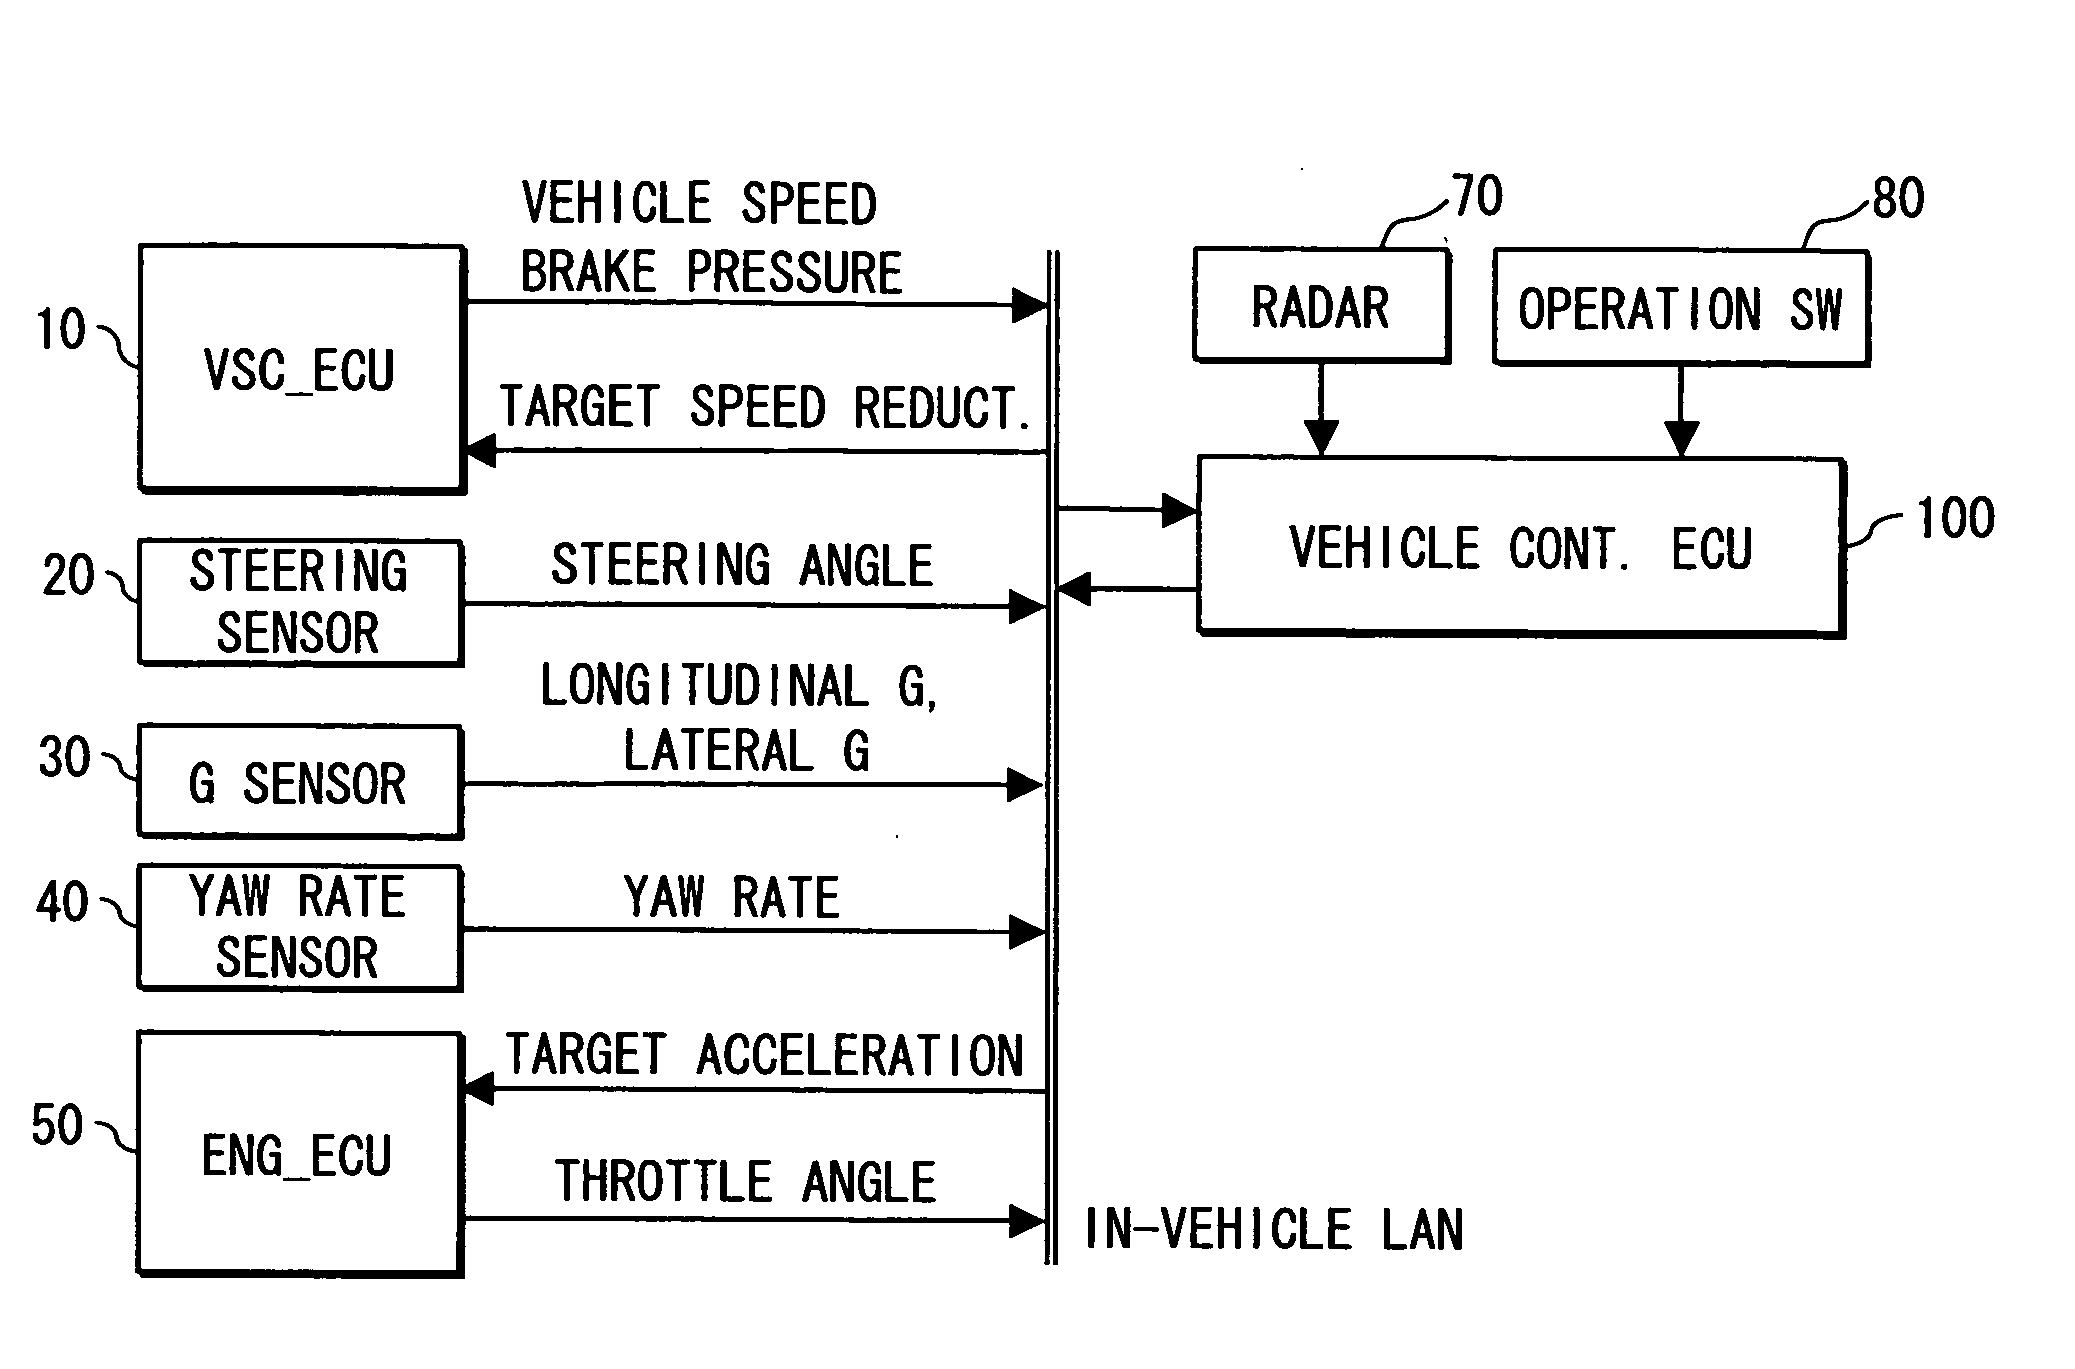 Inter-vehicle distance control apparatus and method for controlling inter-vehicle distance